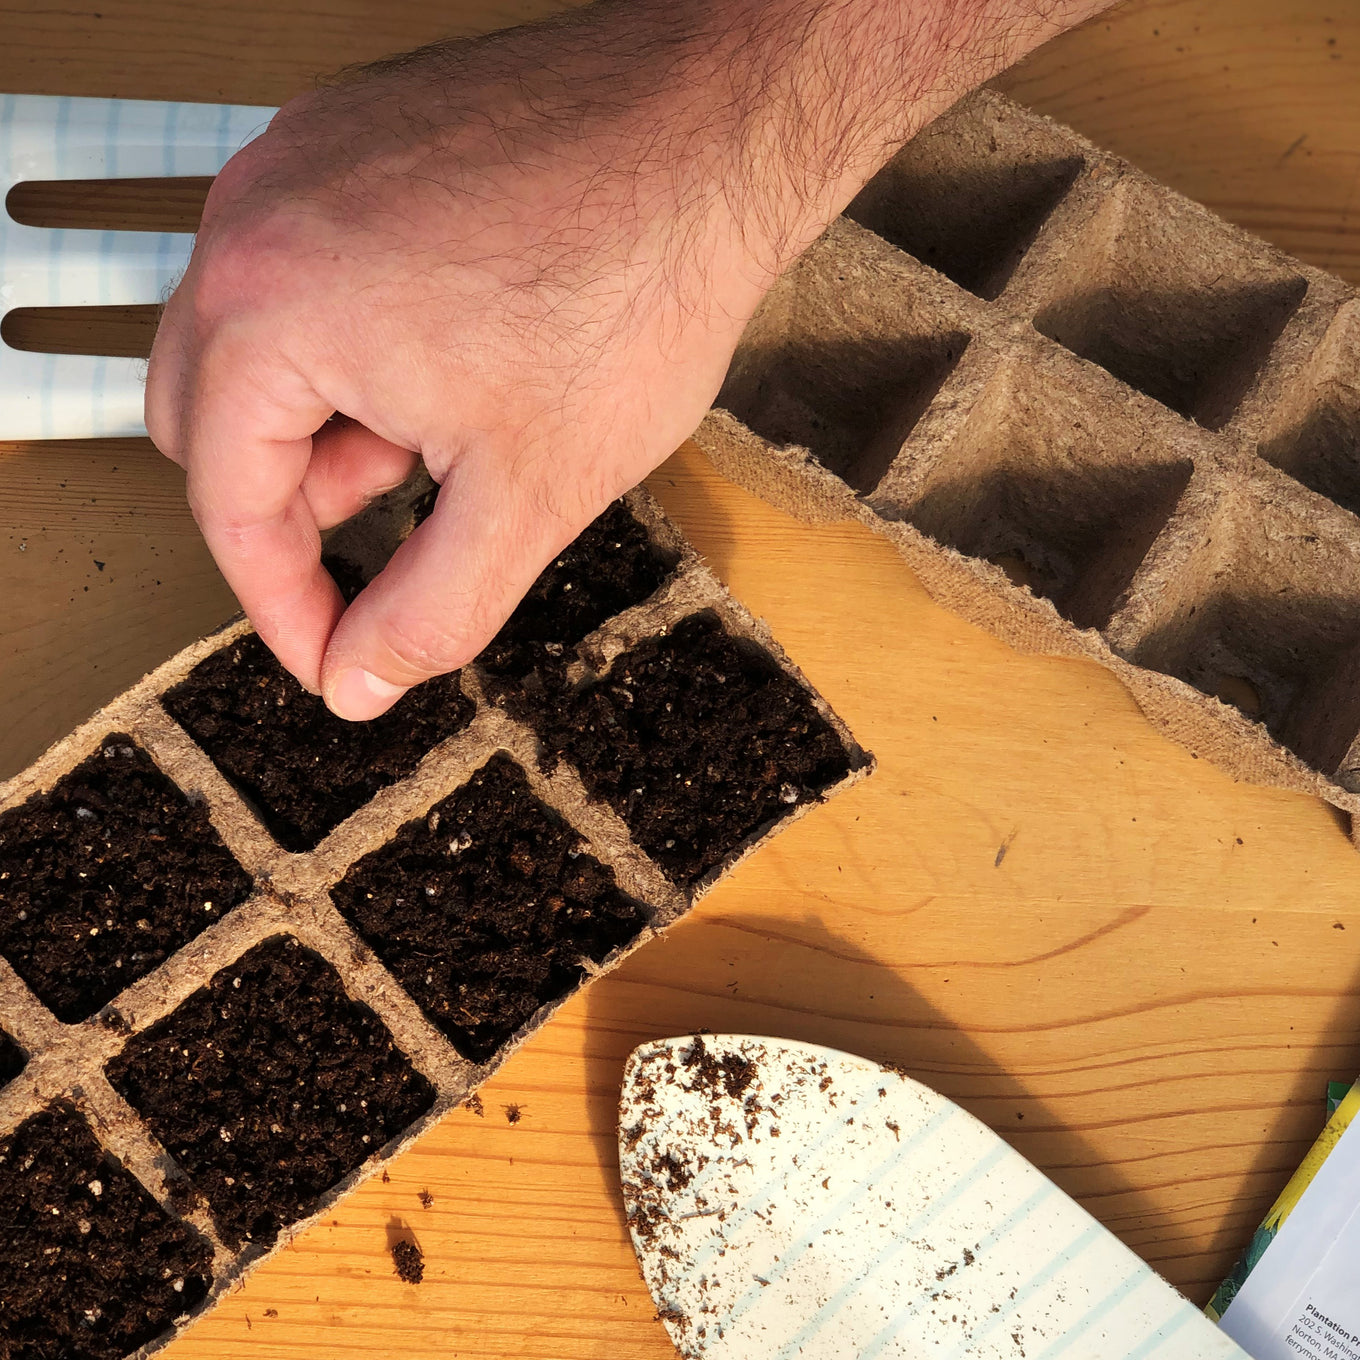 Starting Organic Black Beauty Zucchini Squash Seeds in Jiffy biodegradable peat strip trays for easy outdoor transplanting.